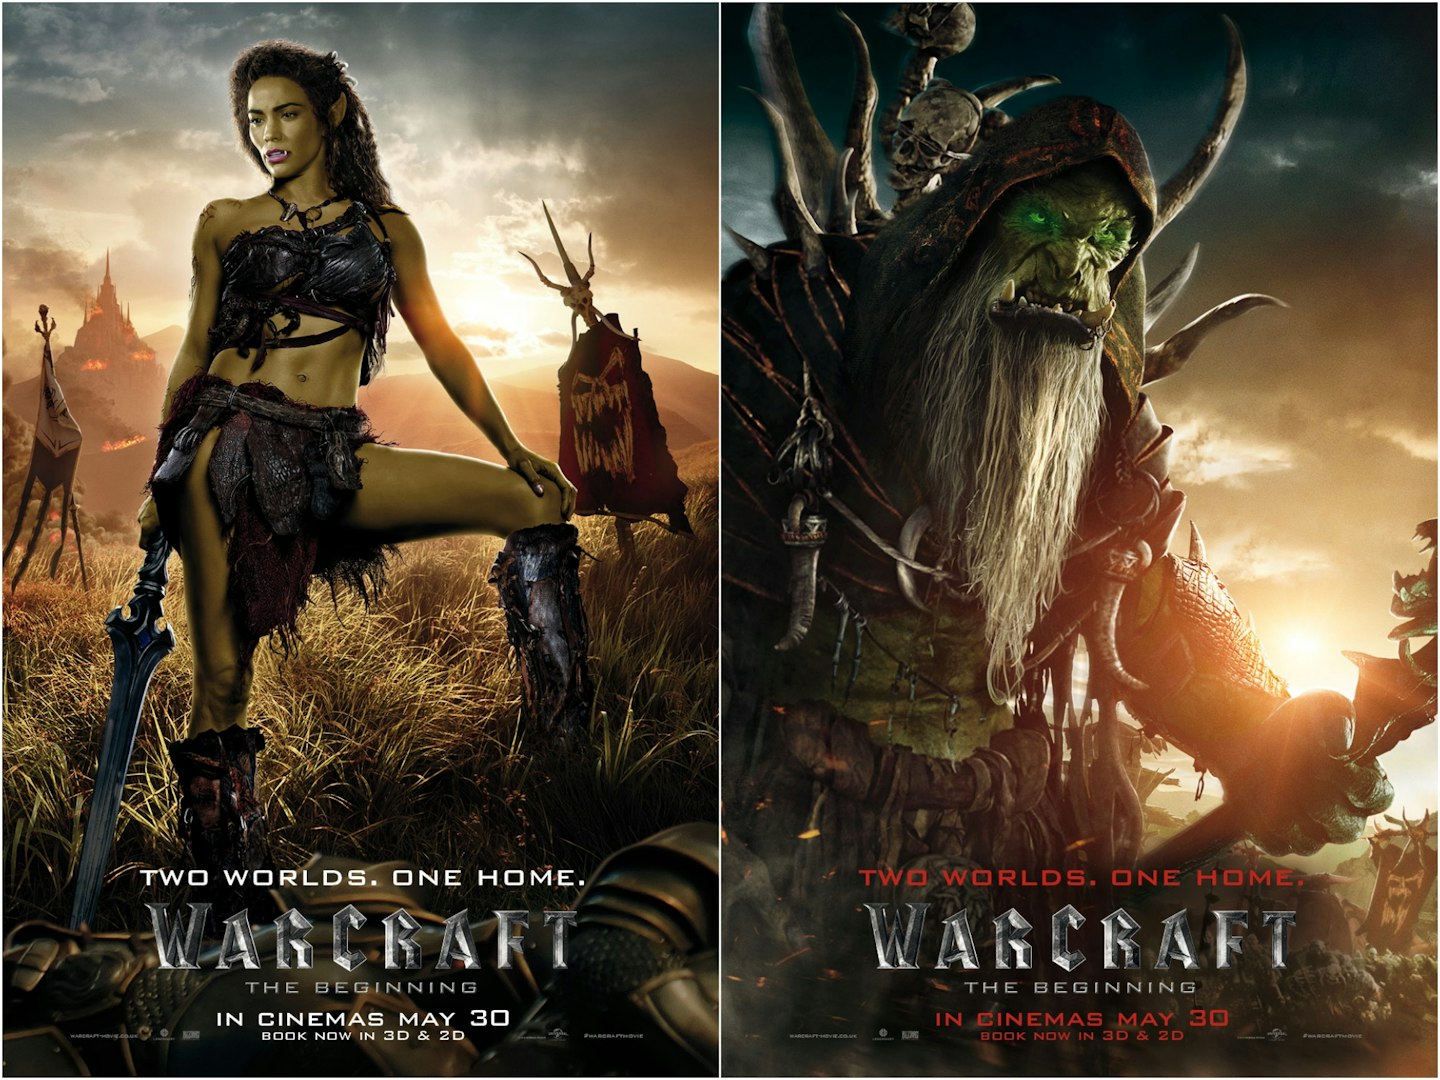 Warcraft: The Beginning character posters